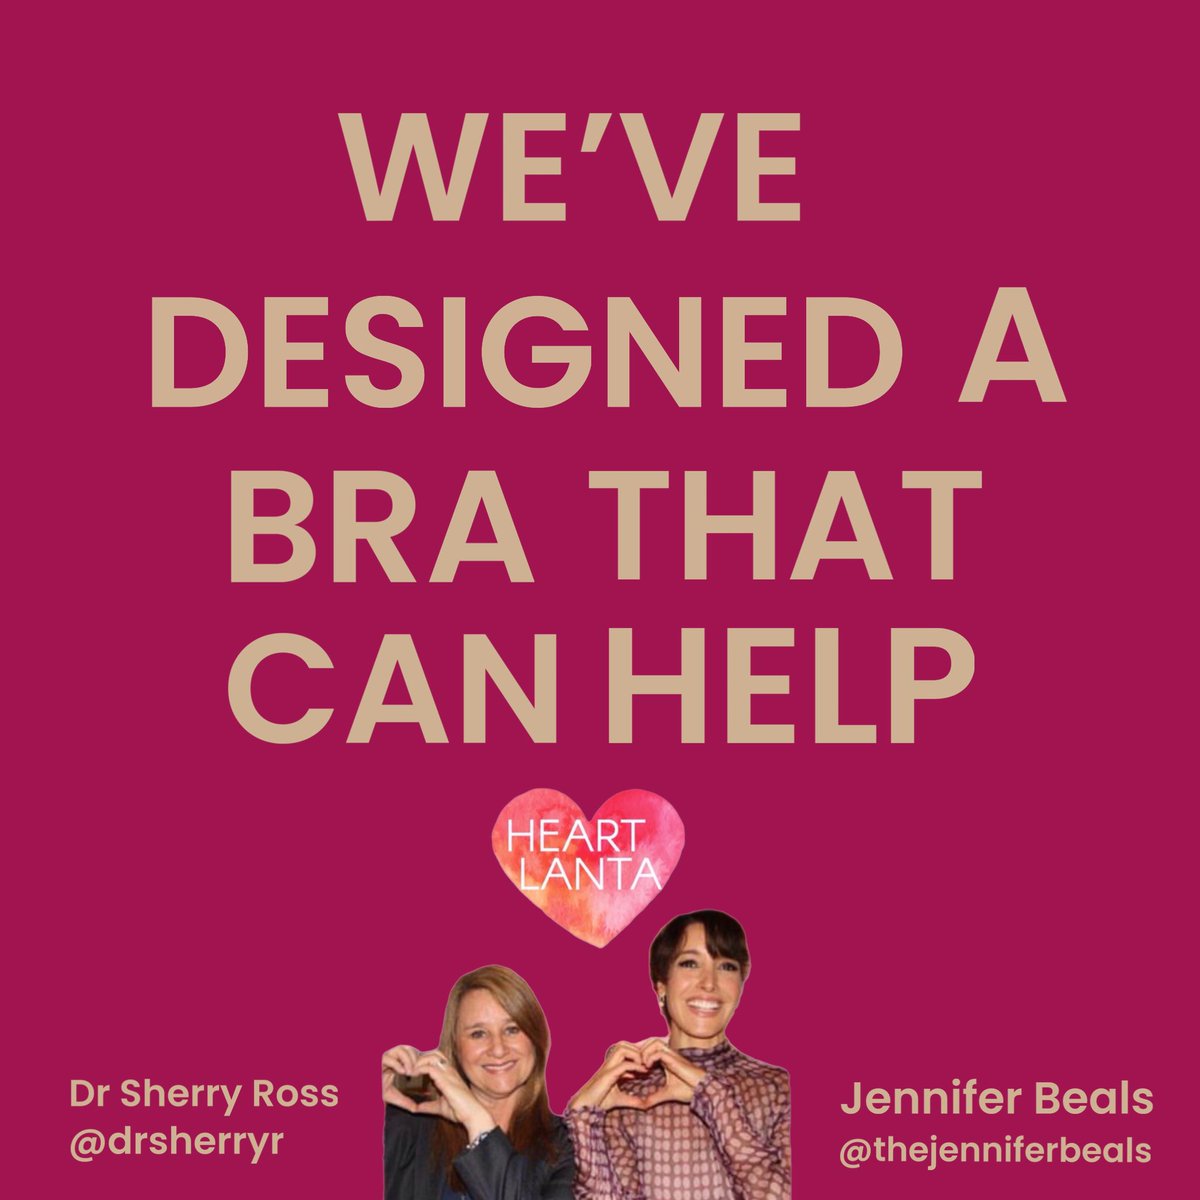 The Heartlanta Bra is Now Available! Order yours at the official link of @HeartlantaB acesohealthandmedical.com Made by a Woman Jennifer Beals @jenniferbeals Dr. Sherry Ross @DrSherylRoss